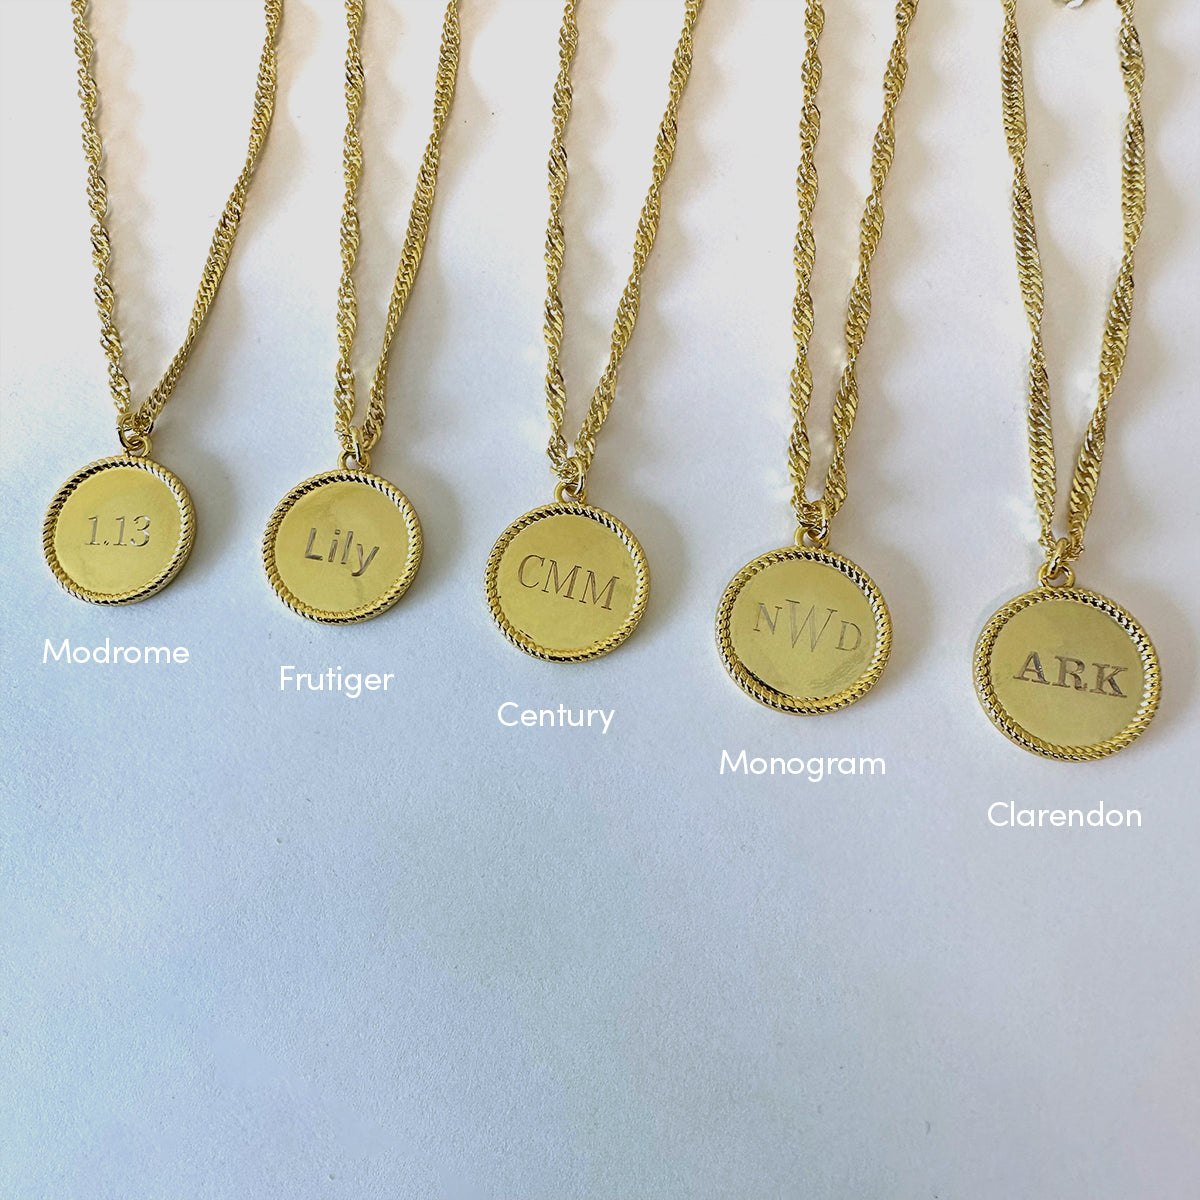 Buy Personalized Necklace for Best Friend With Engraved – Nutcase